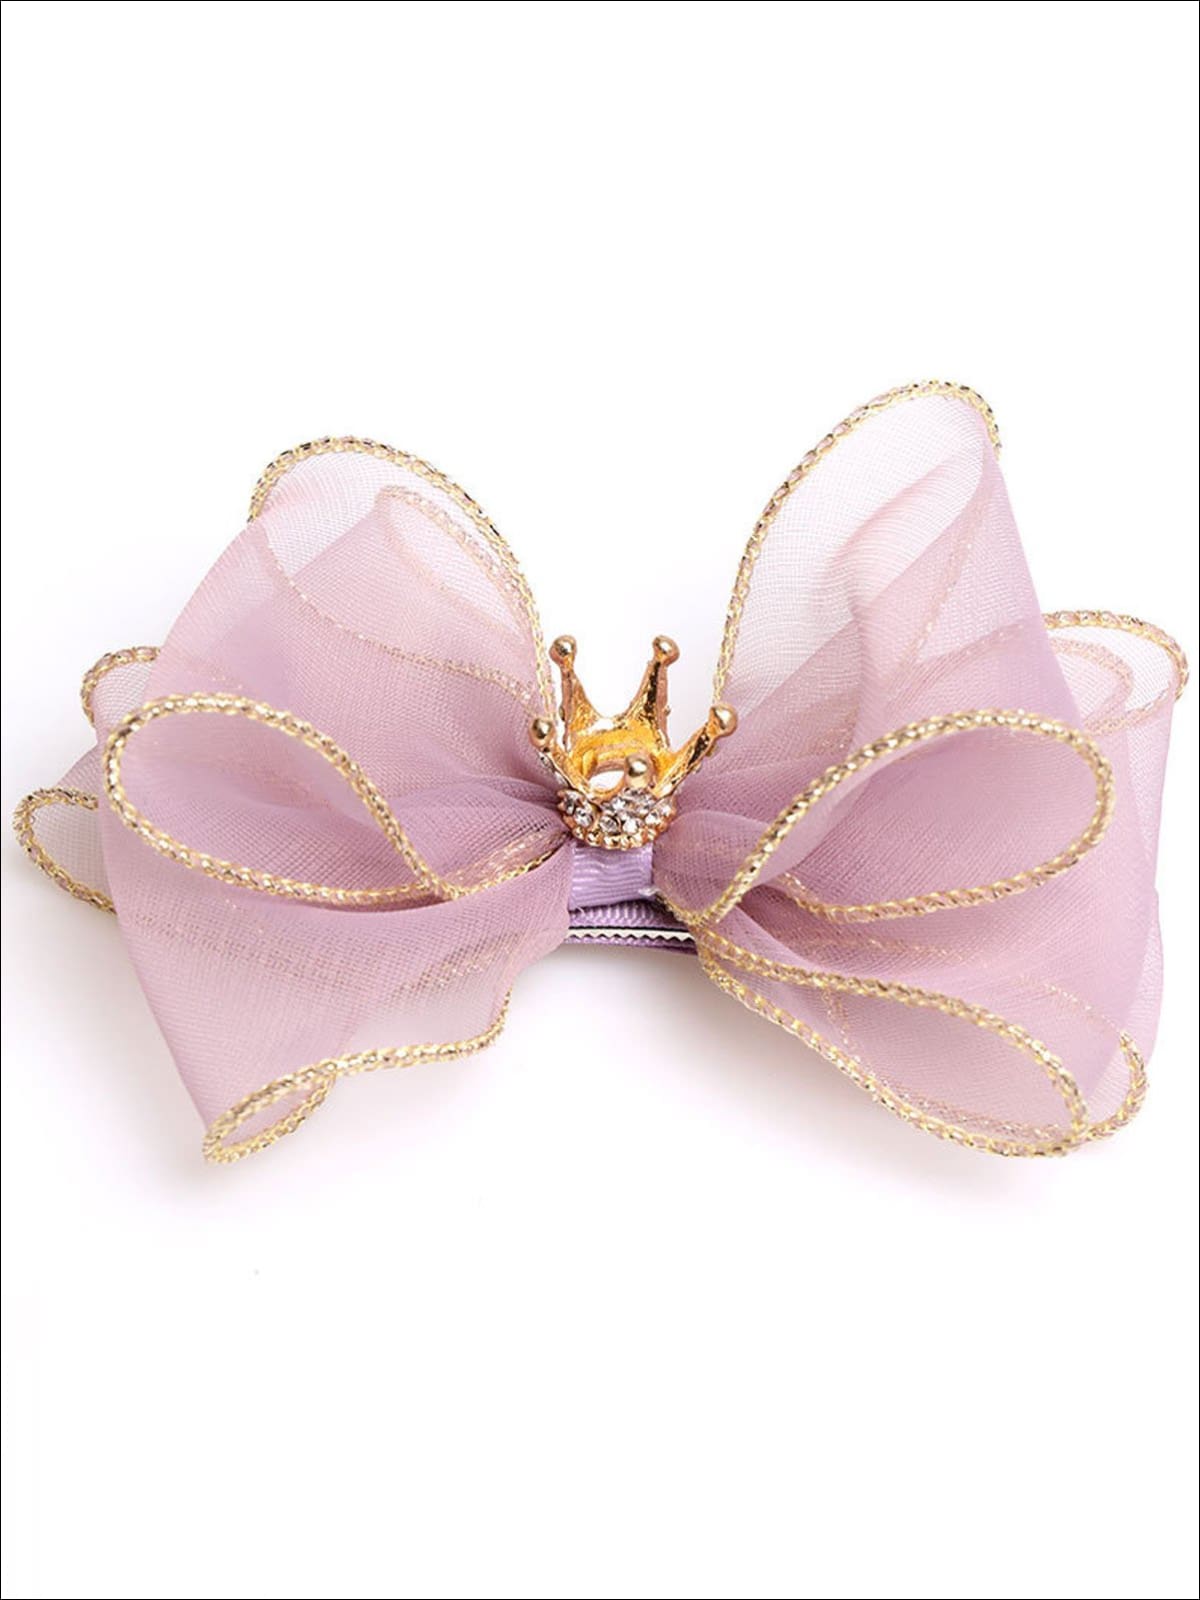 Girls Bow and Rhinestone Embellished Crown Hair Clip - Pink - Hair Accessories